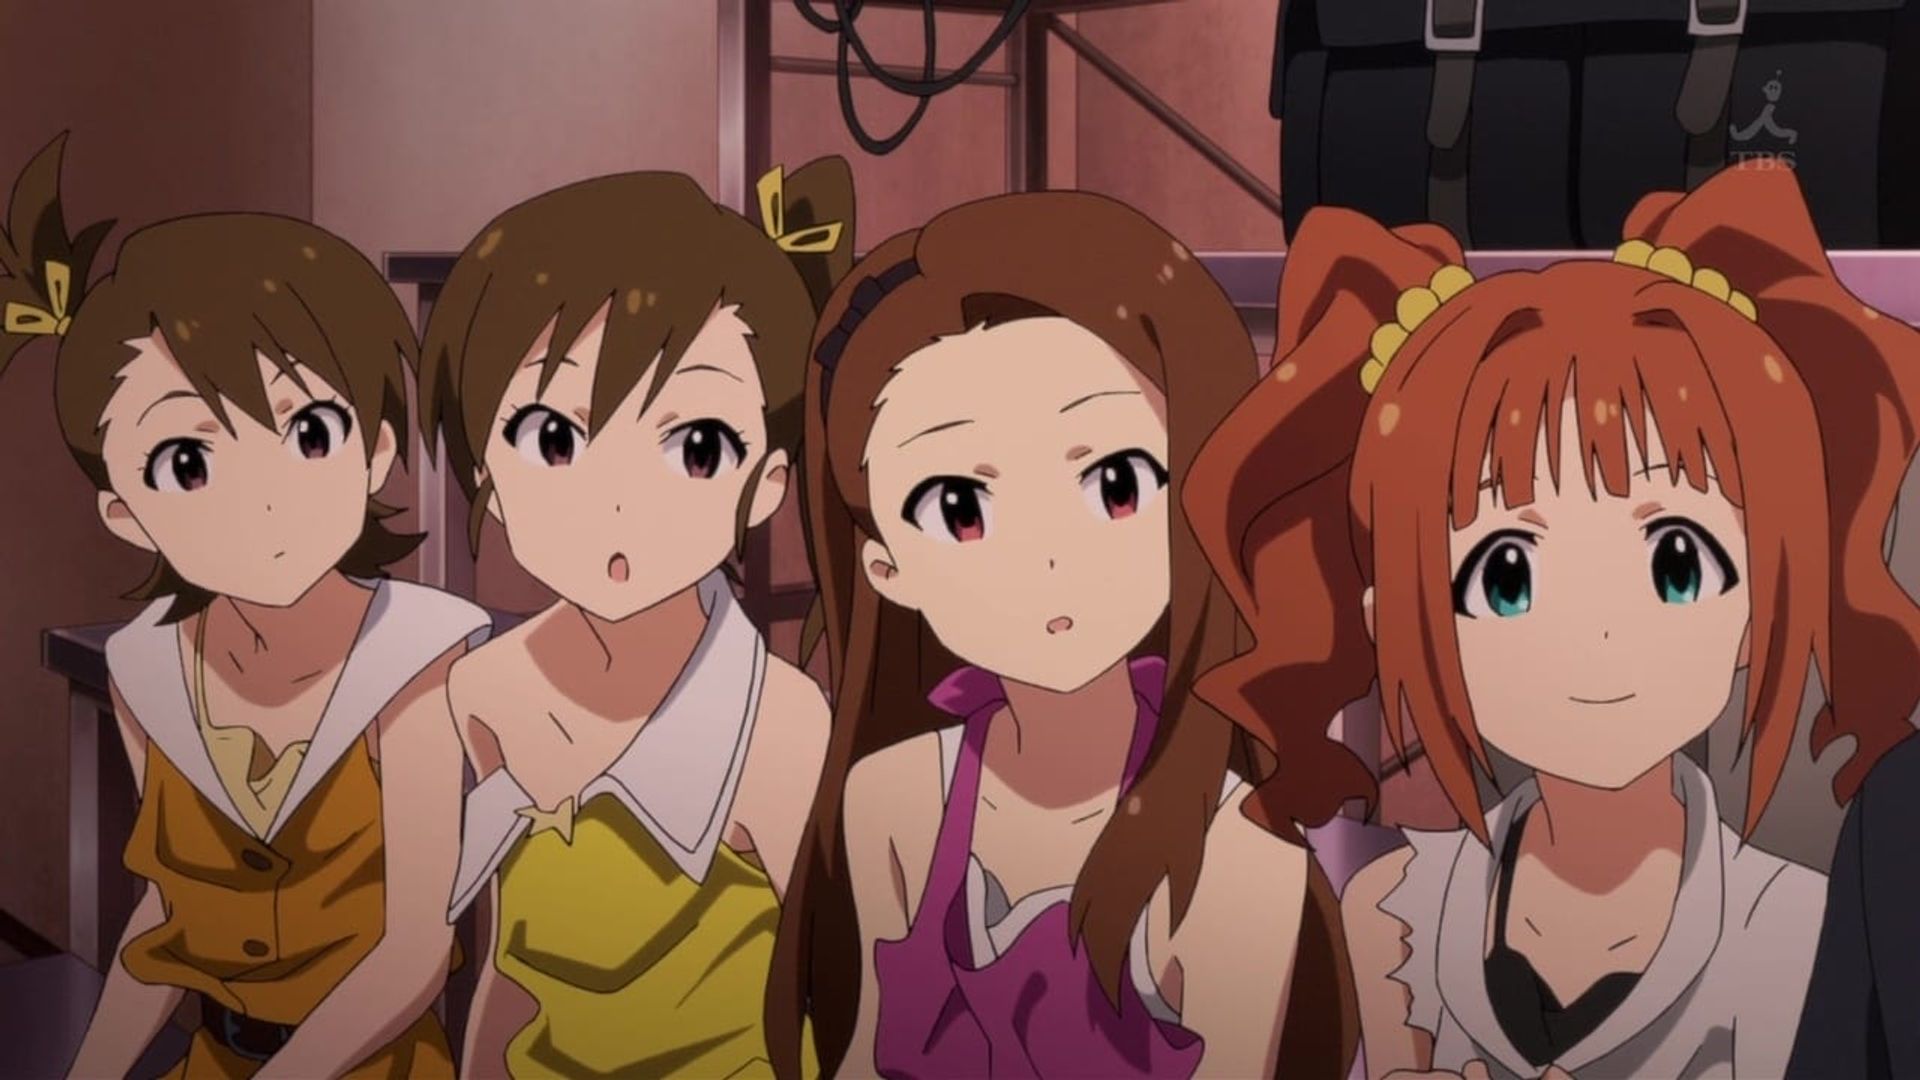 The Idolm@ster background